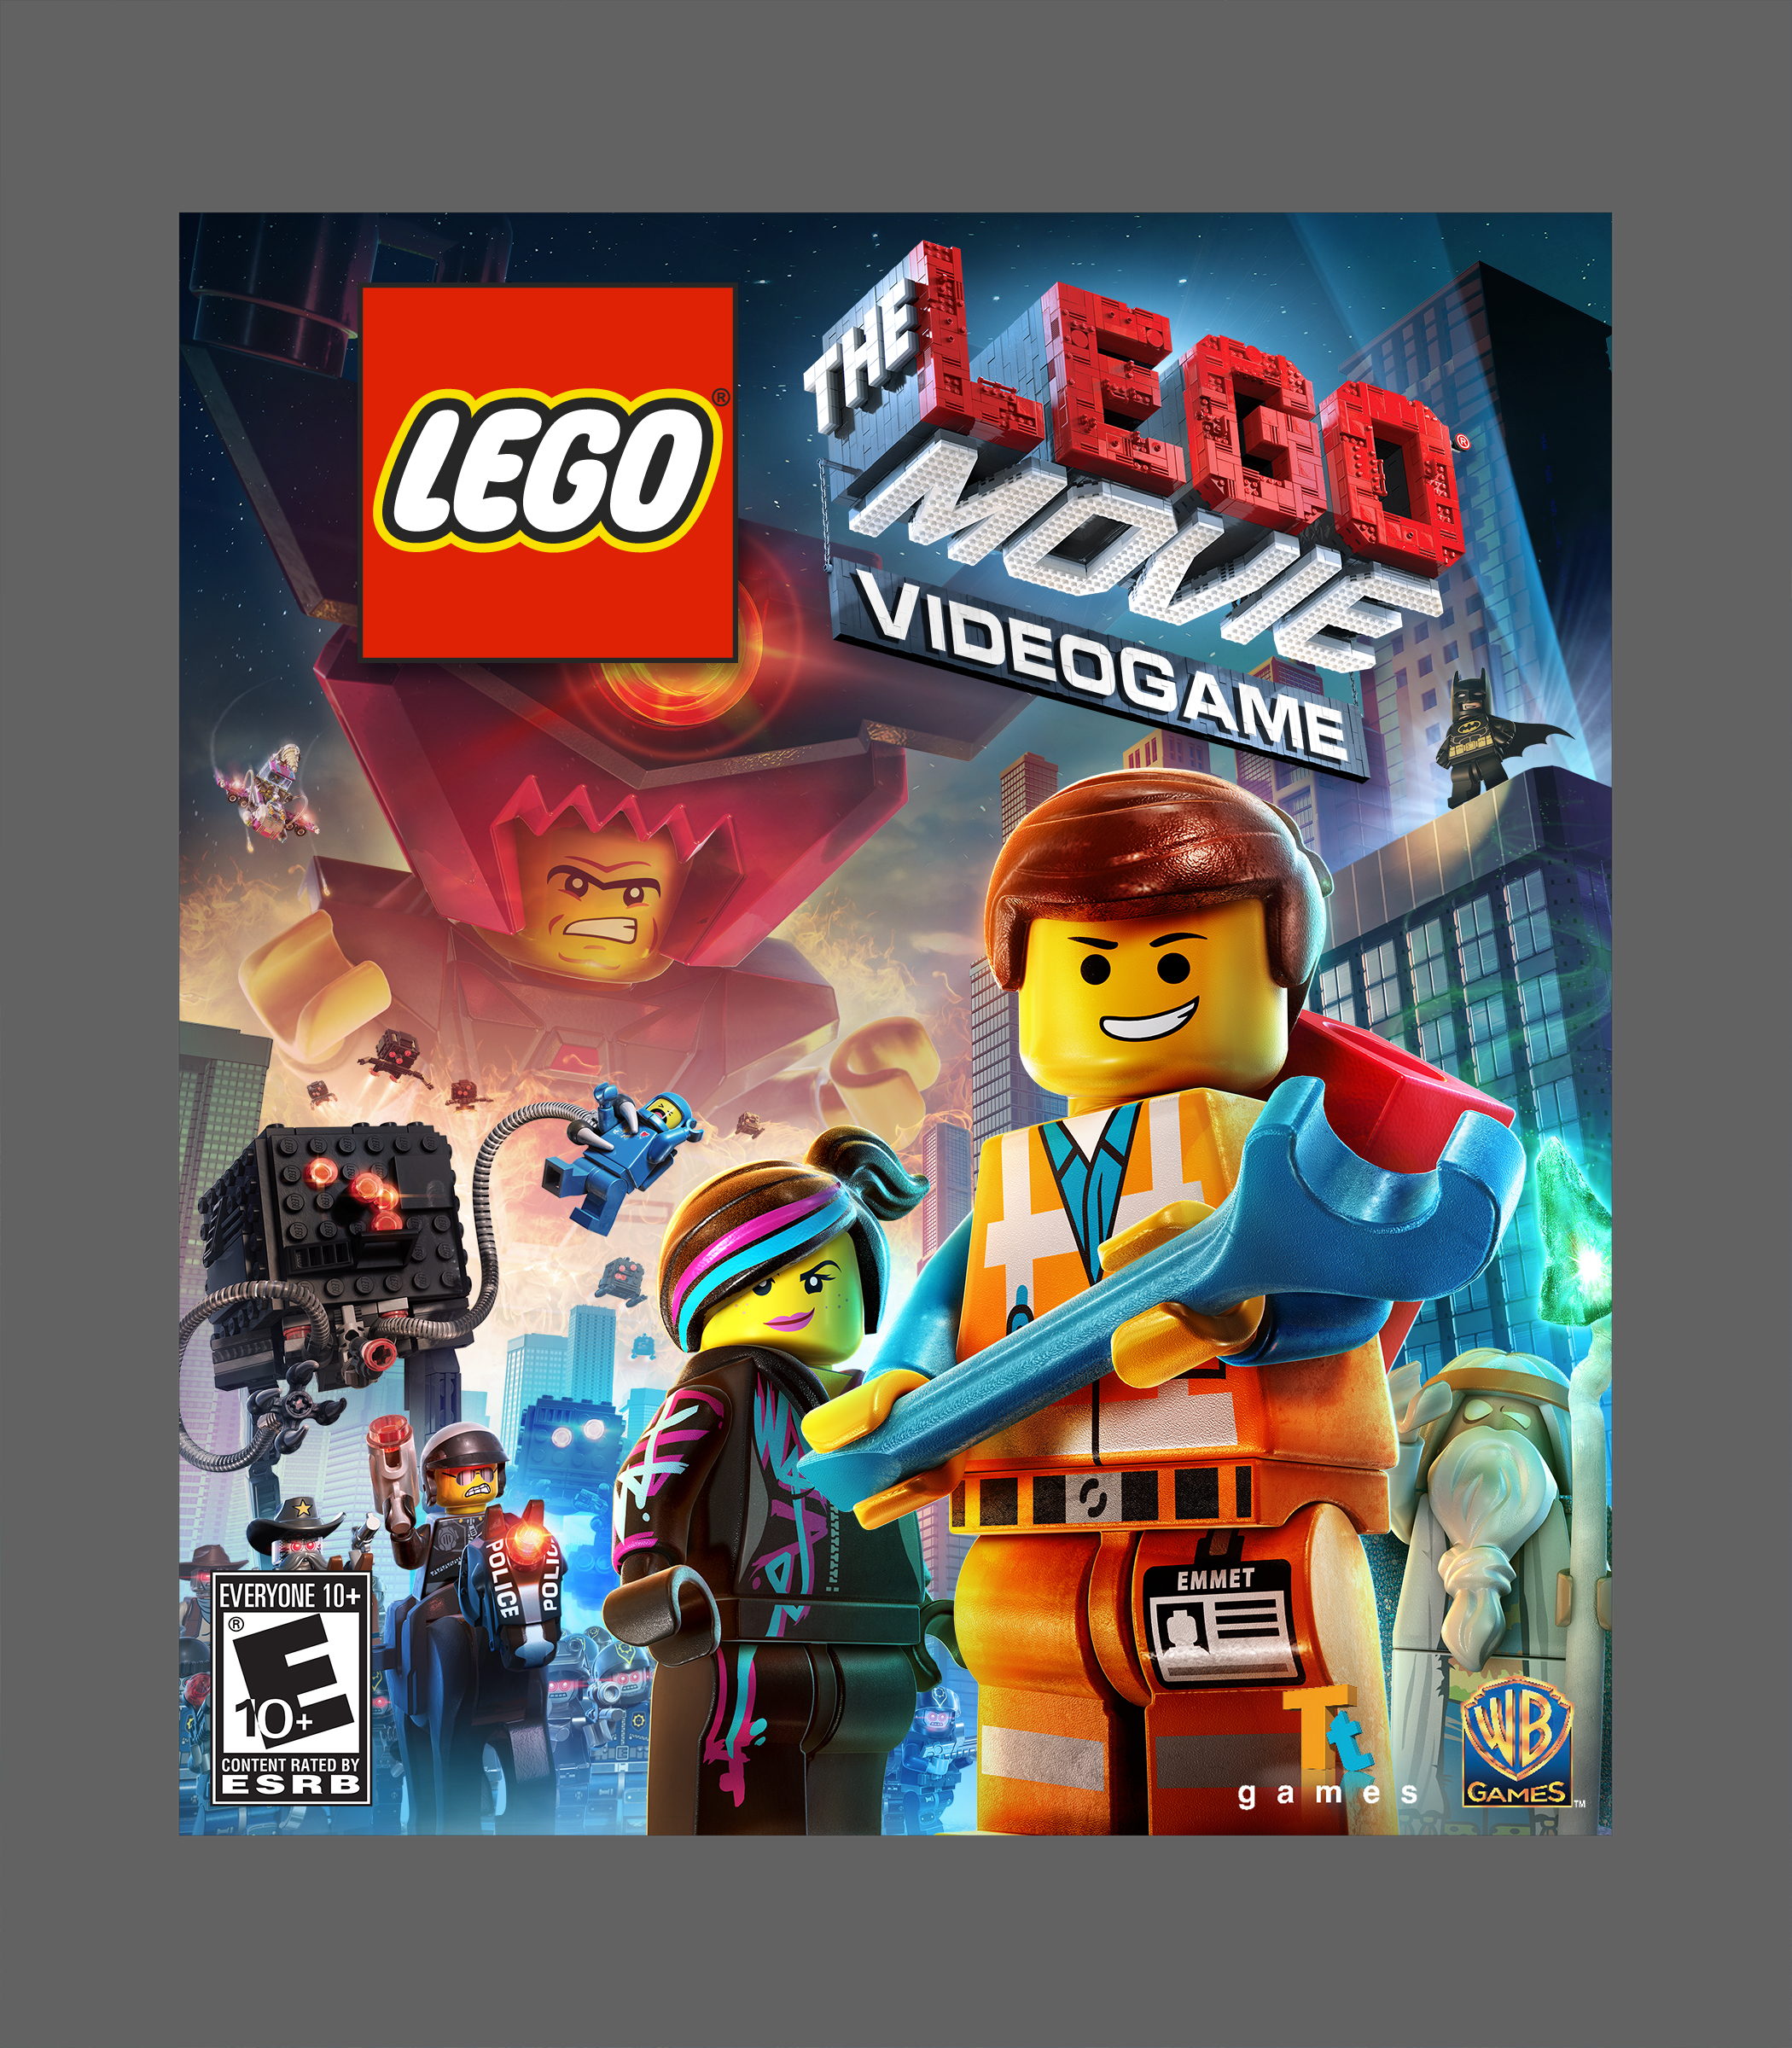 The LEGO Movie Videogame #17